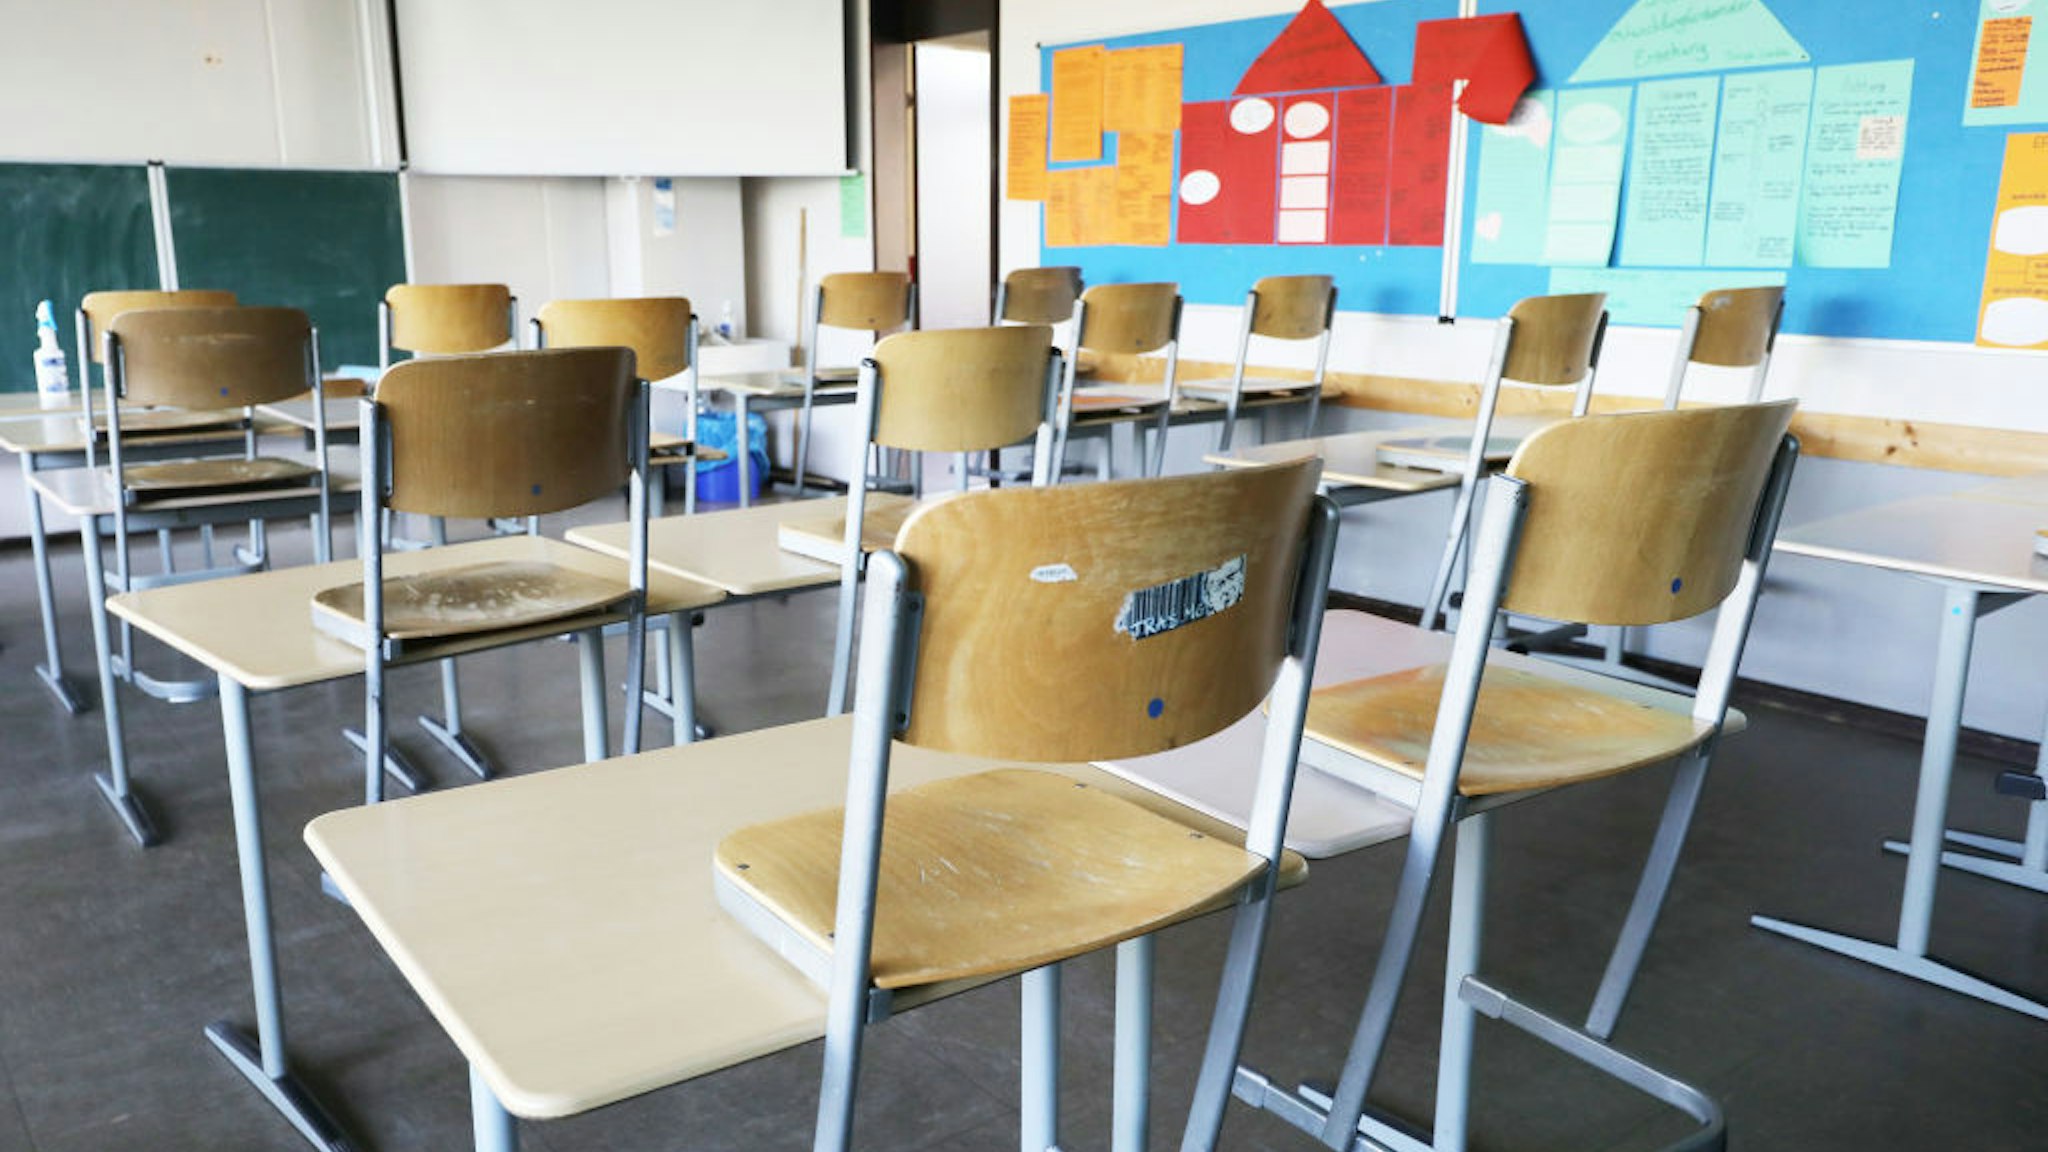 23 April 2021, North Rhine-Westphalia, Kaarst: Chairs are pulled up in an empty classroom at Albert Einstein High School. Photo: Oliver Berg/dpa